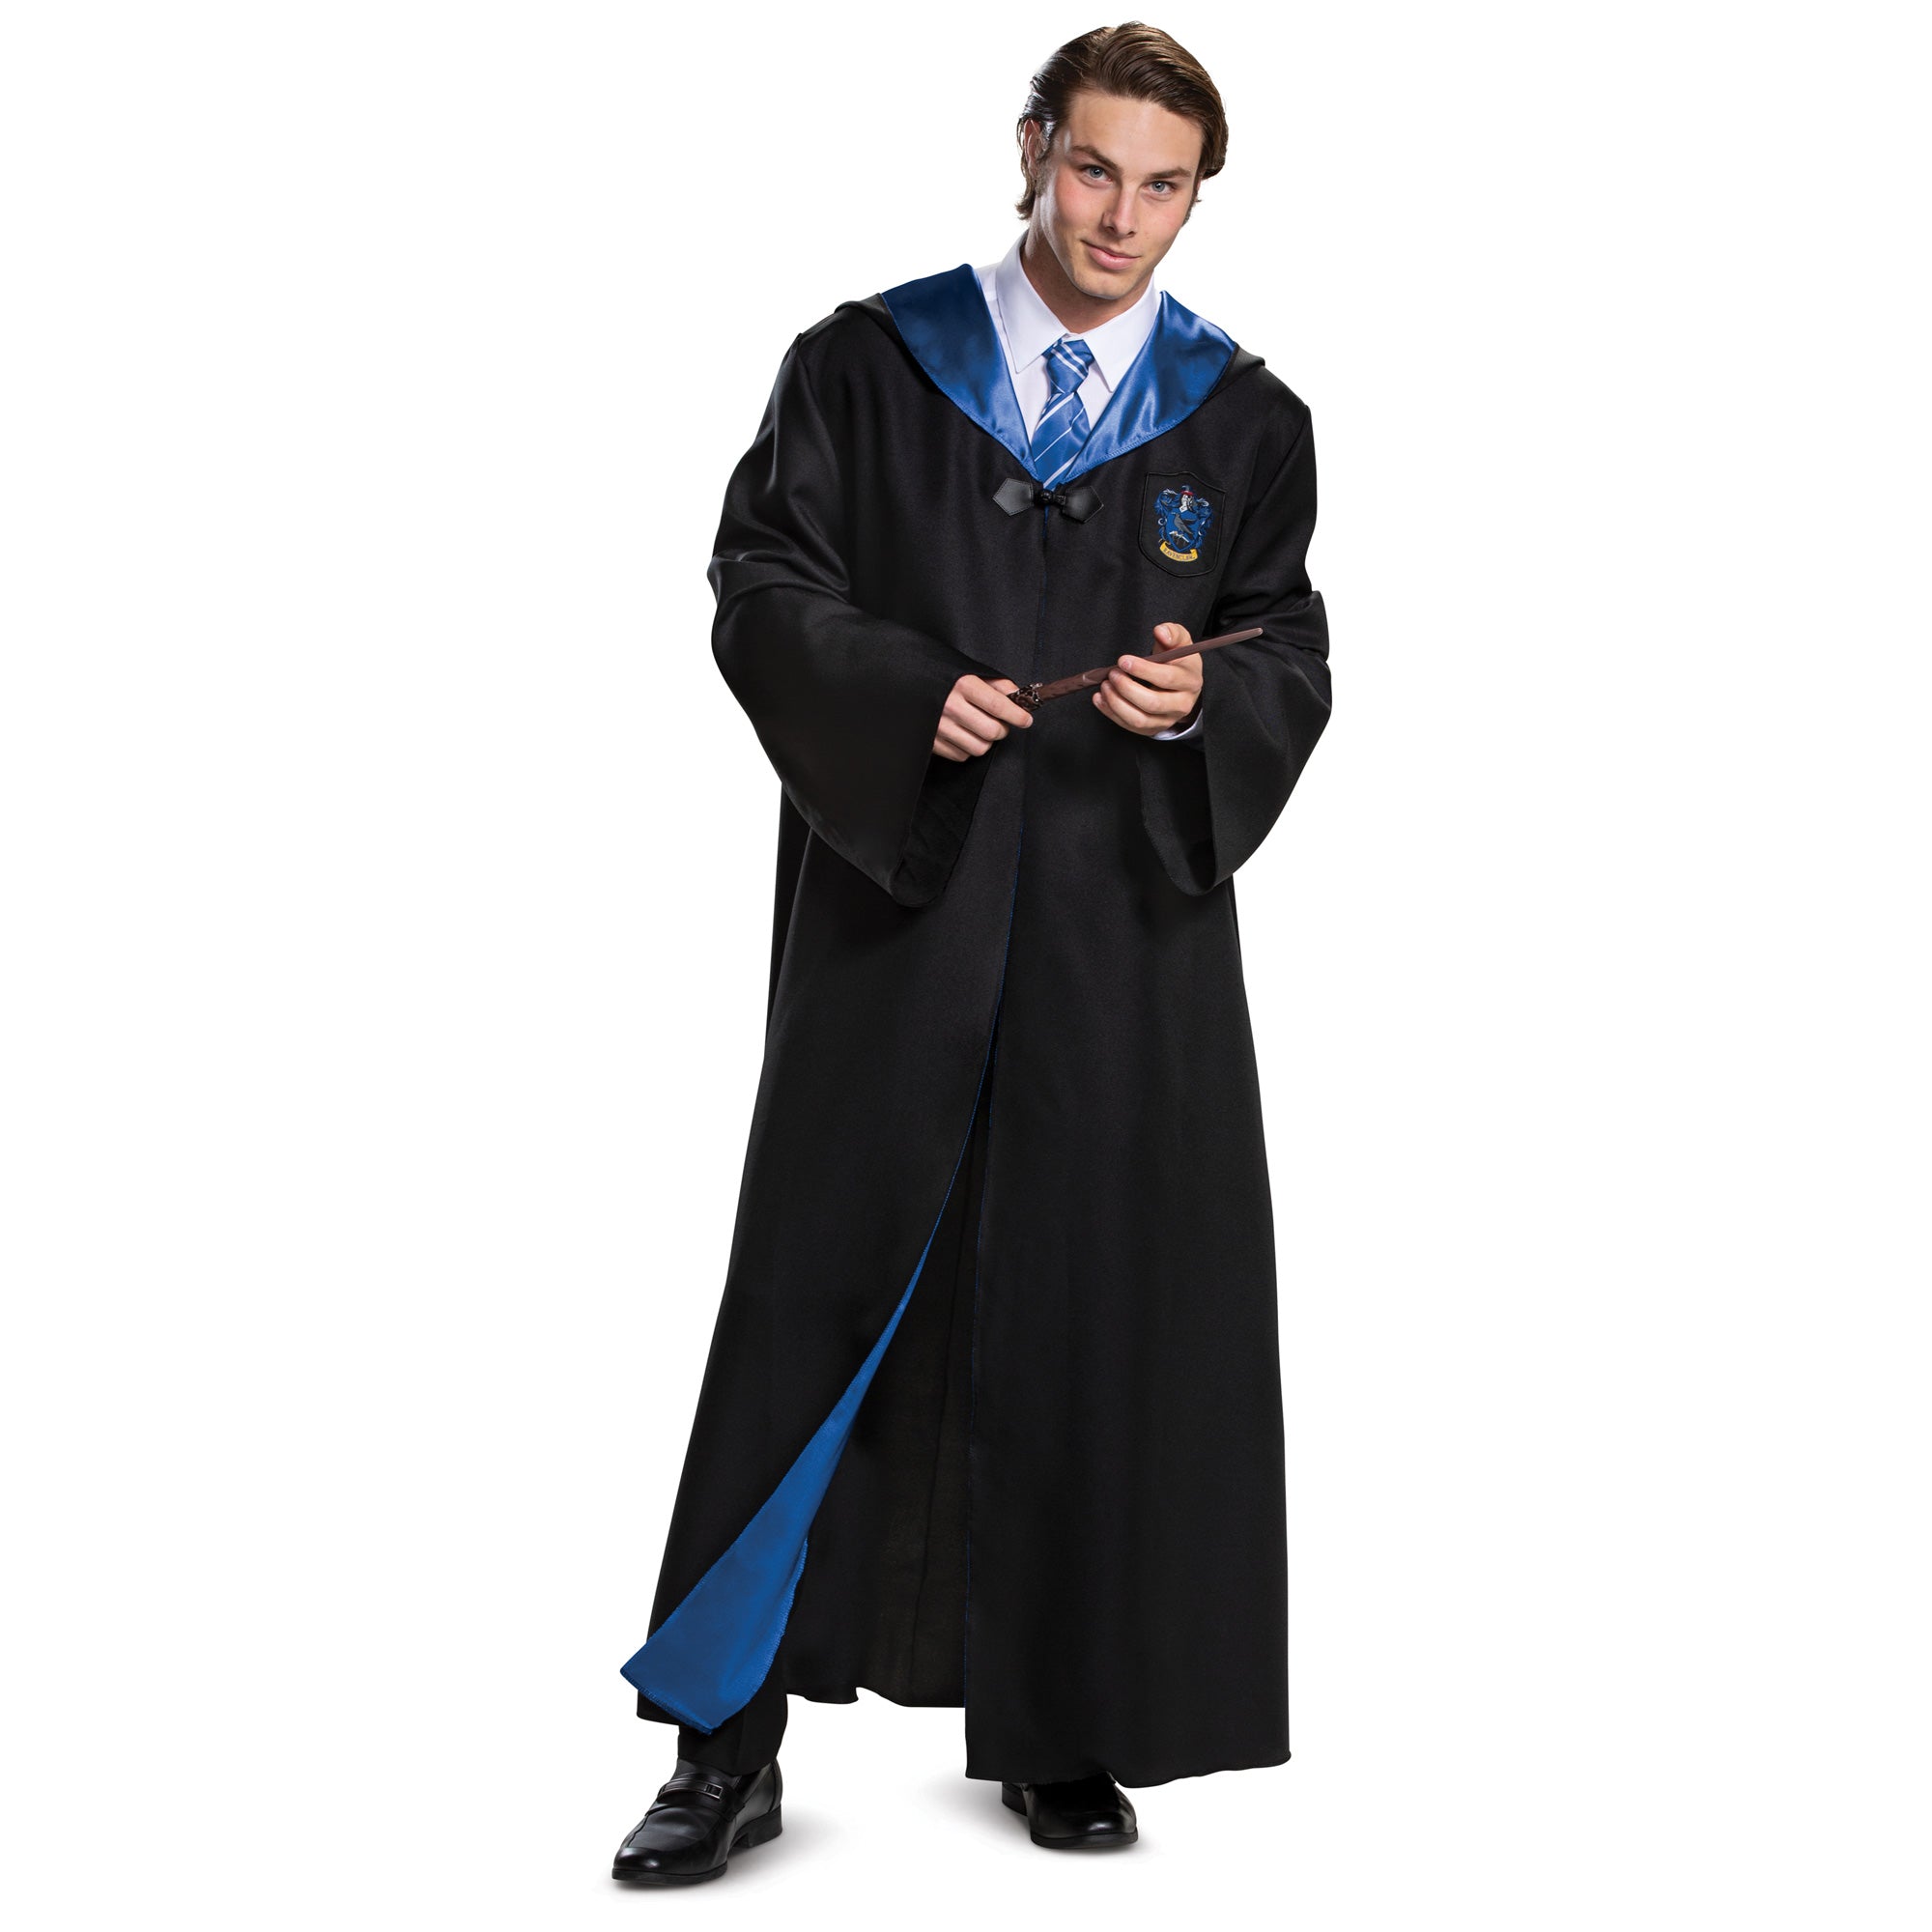 Adult Plus Size Harry Potter Deluxe Ravenclaw Costume Robe